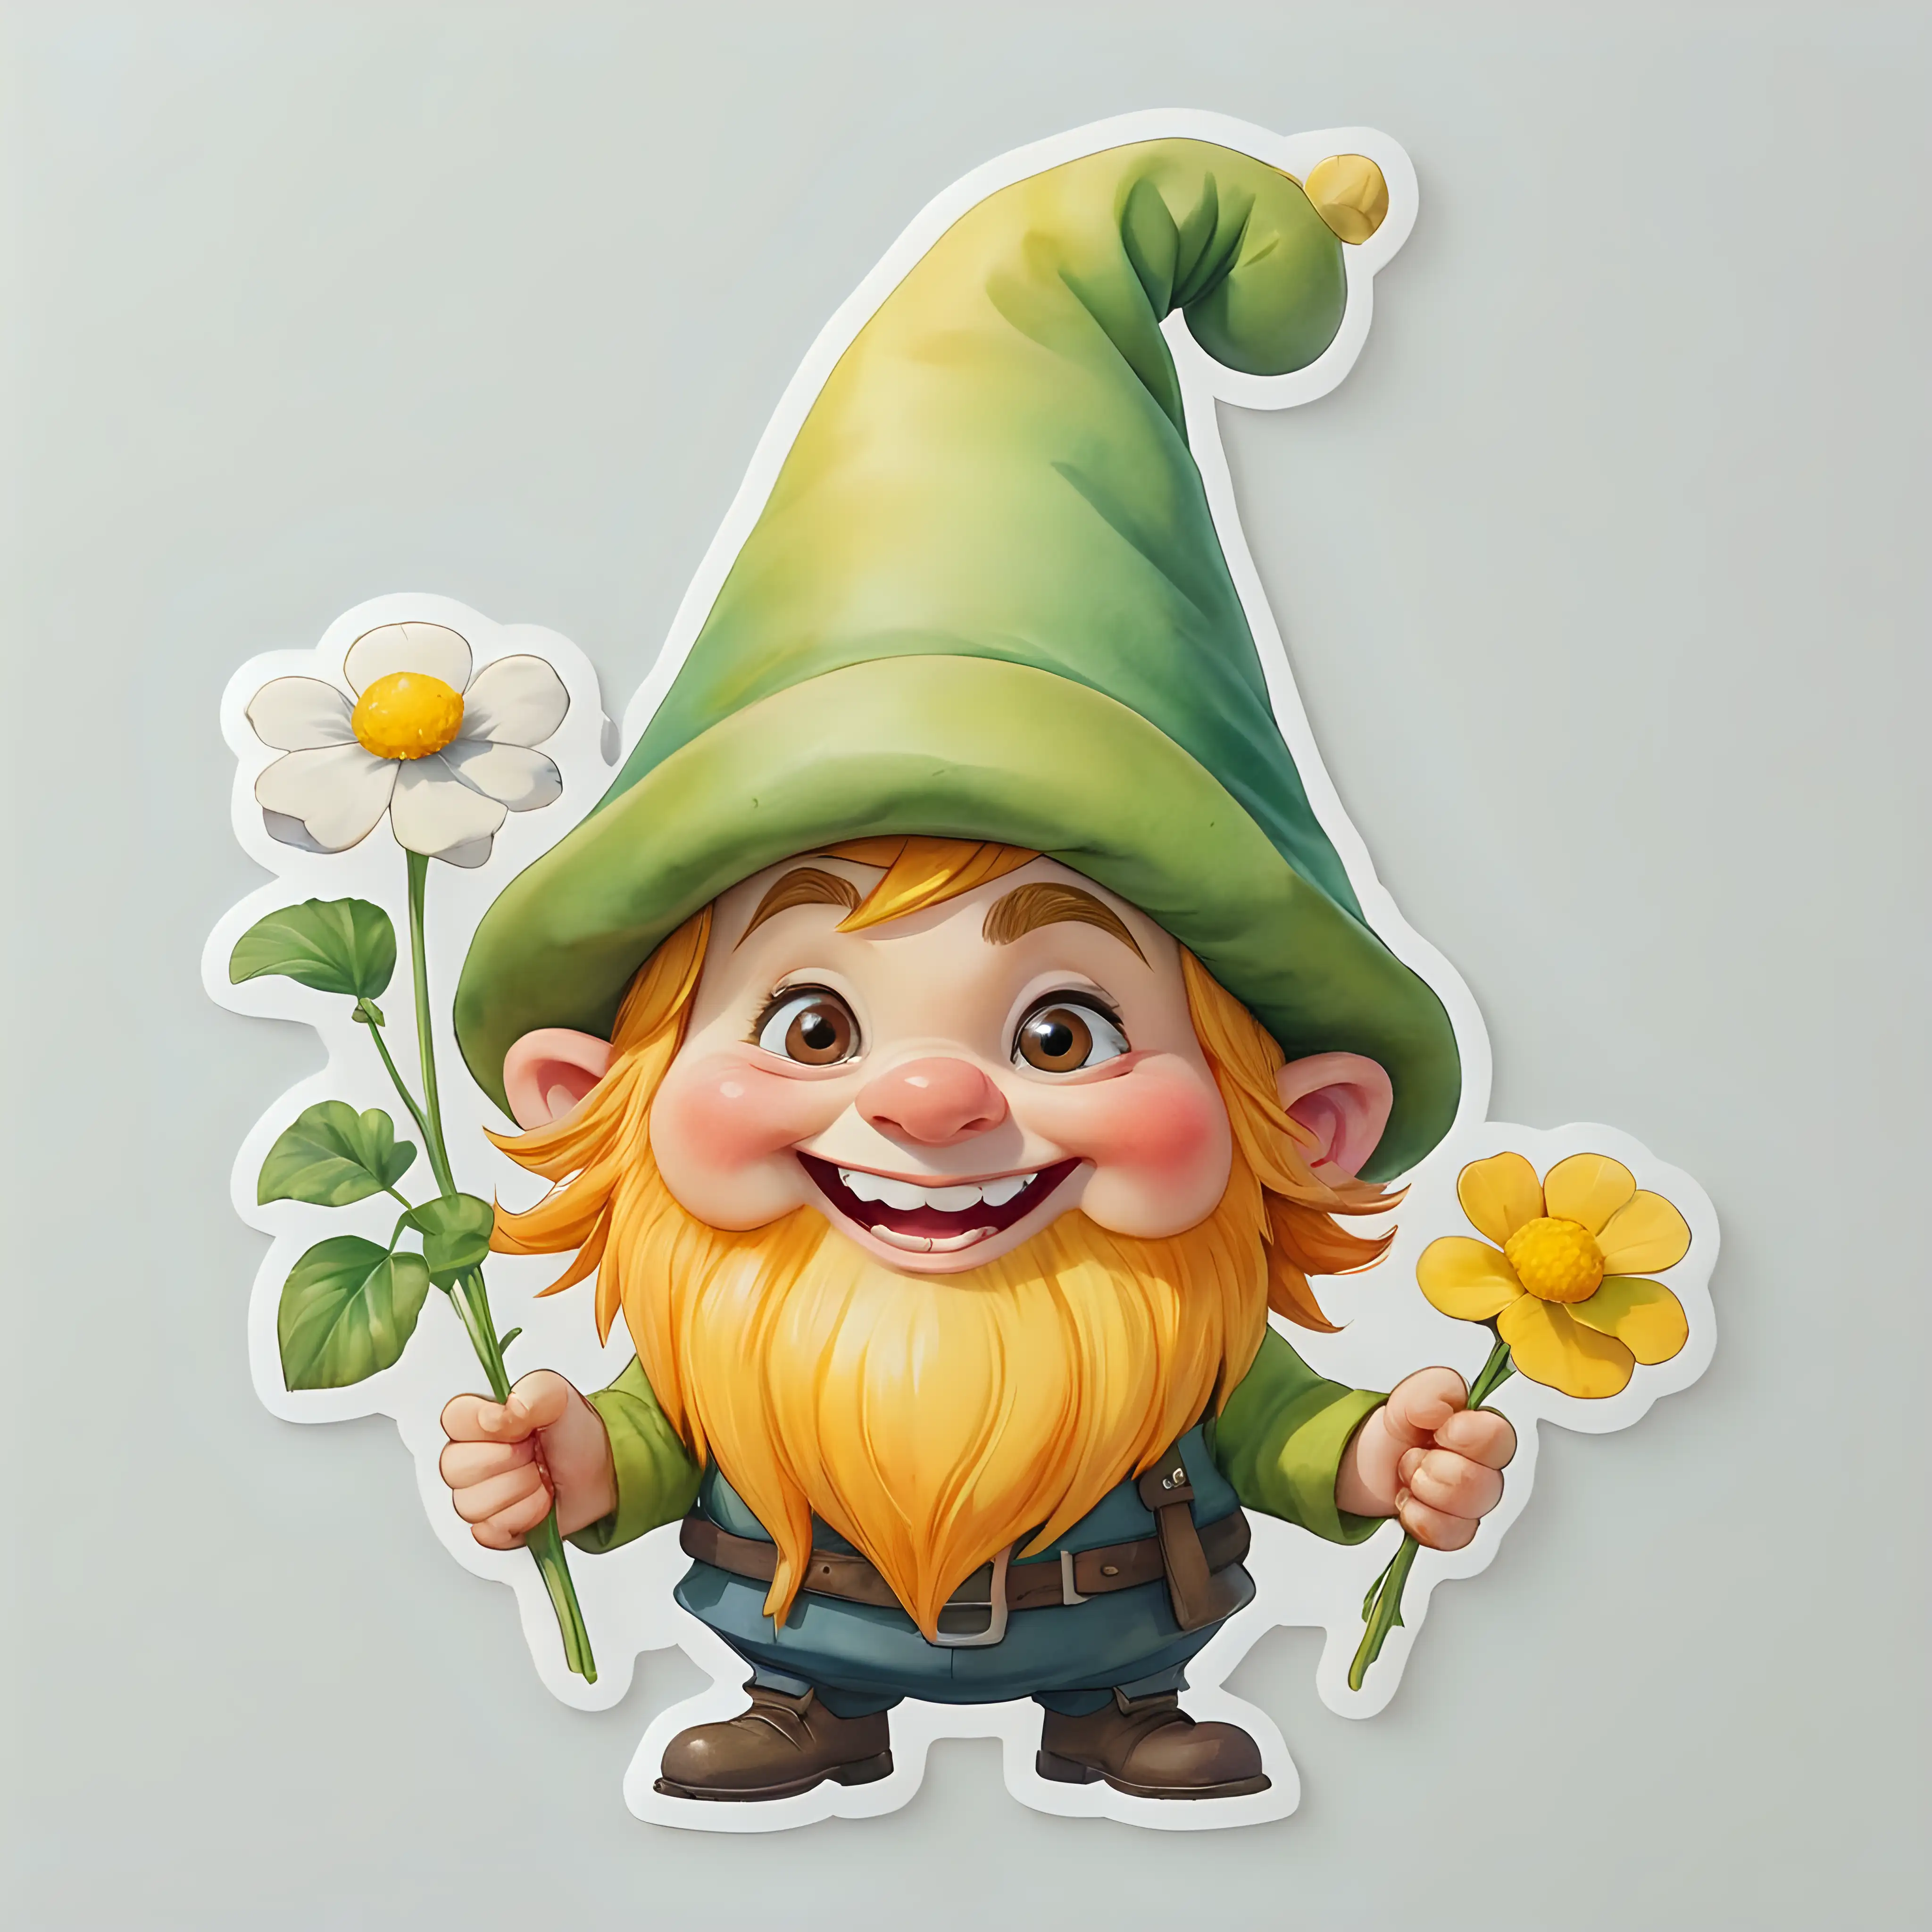 Cheerful Gnome with Yellow Hat Holding Flower and Clover